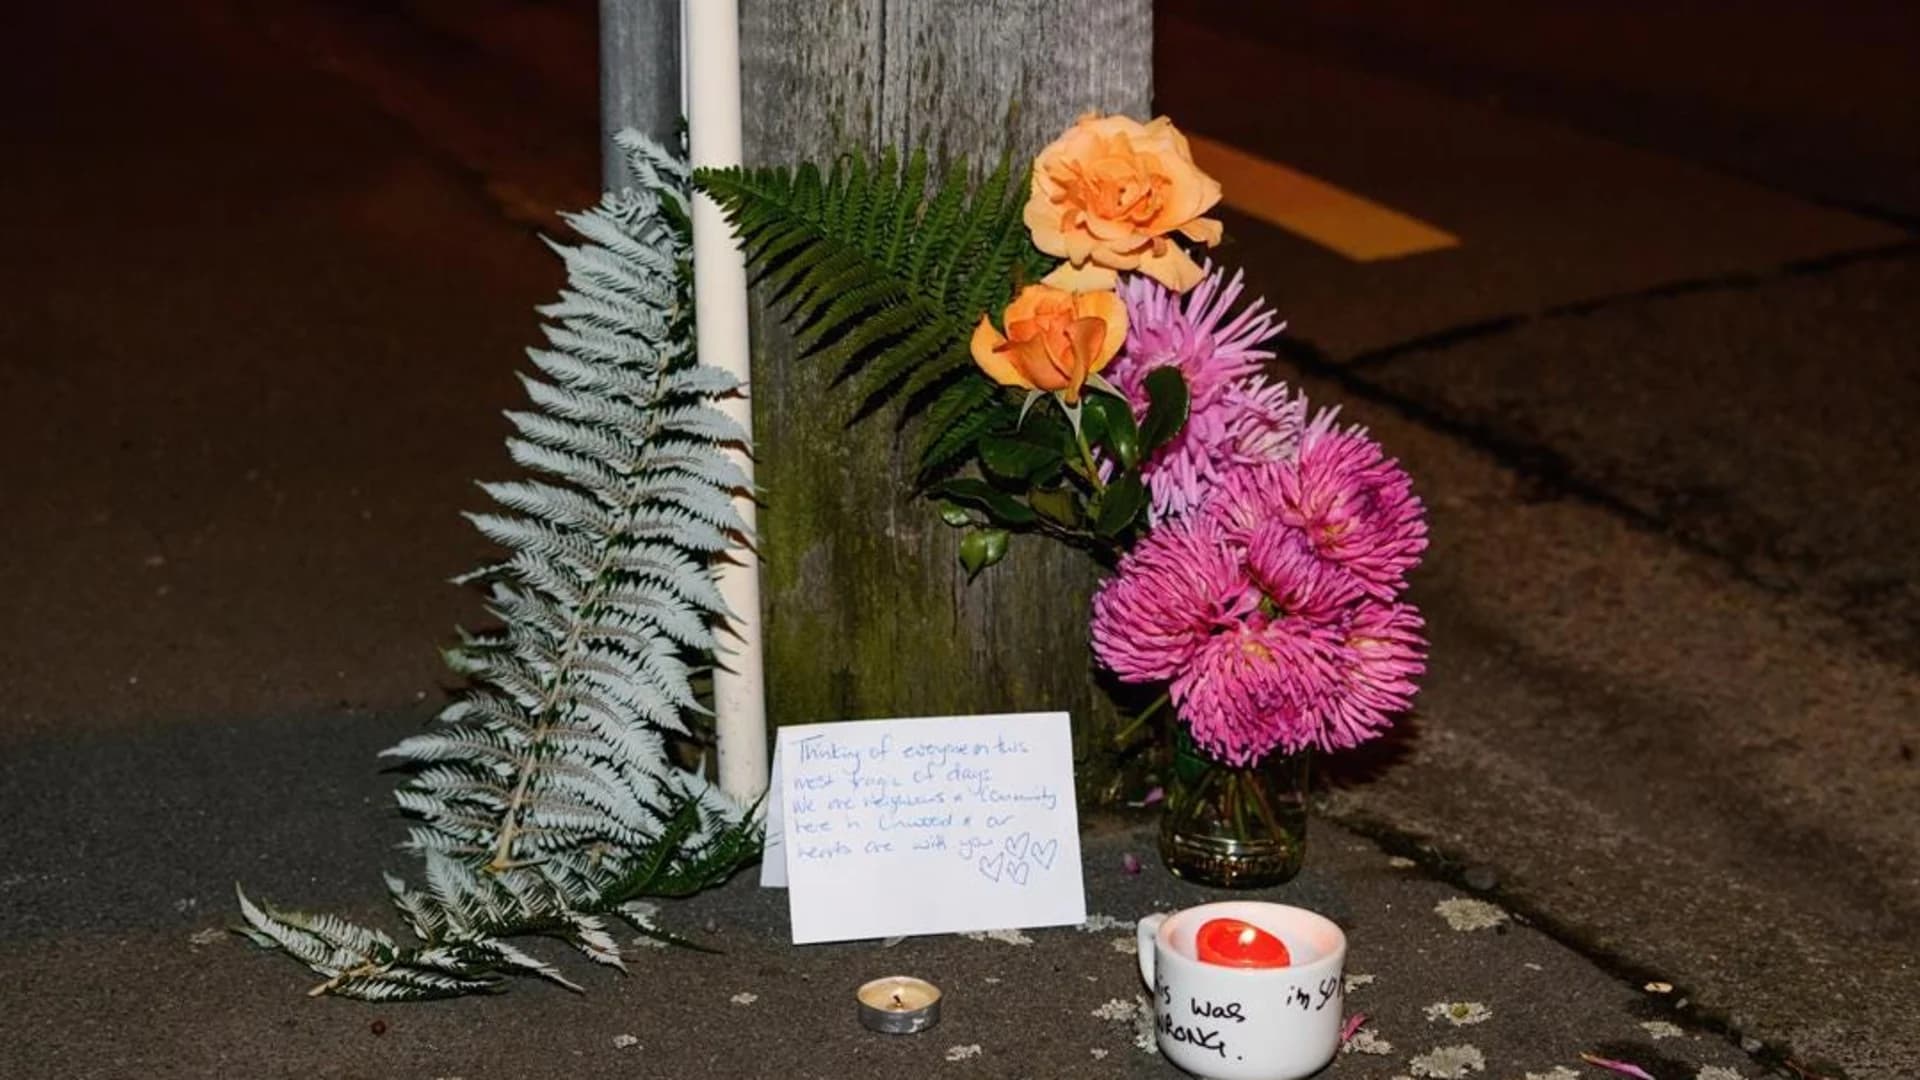 Aftermath of New Zealand mosque shootings